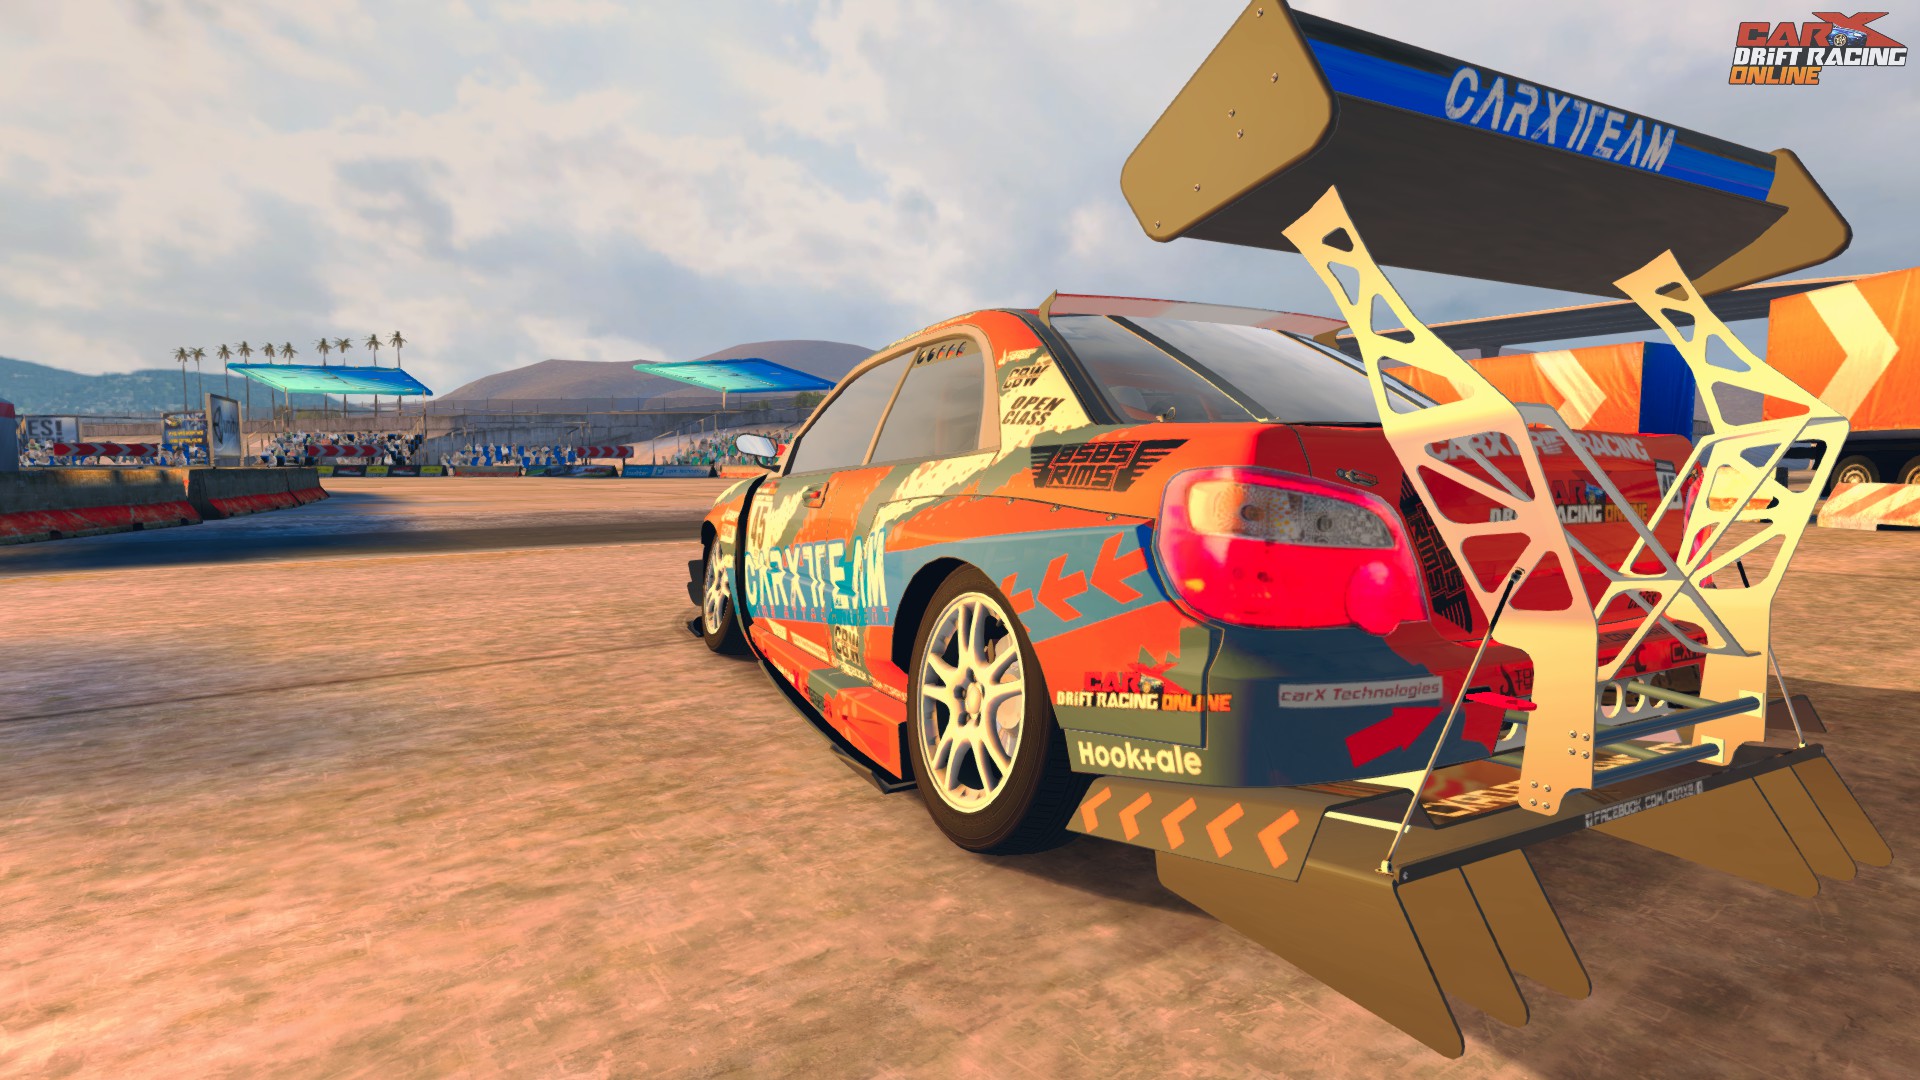 CarX Drift Racing Online is now - CarX Technologies